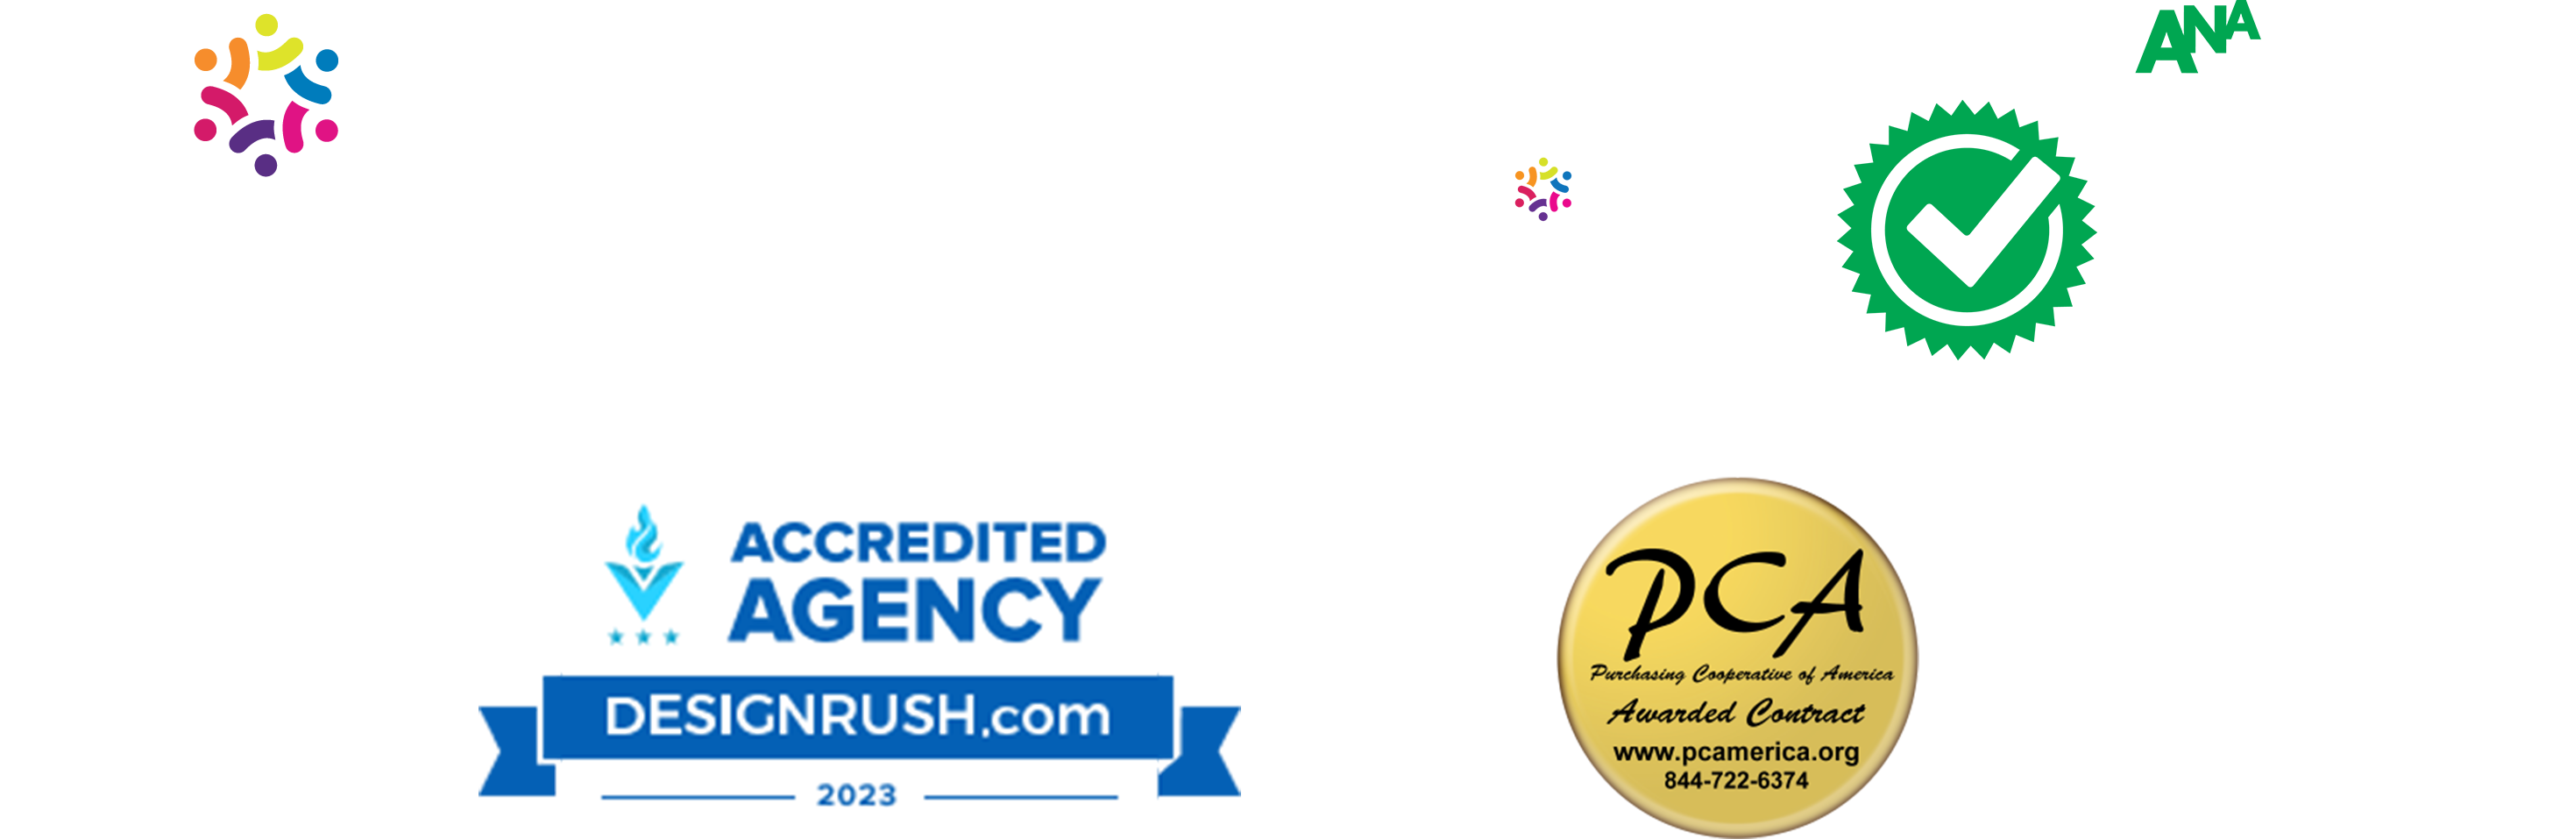 Women-Owned business, WBENC certified, Certified Diverse Supplier, DesignRush Accredited Agency, PCA logos